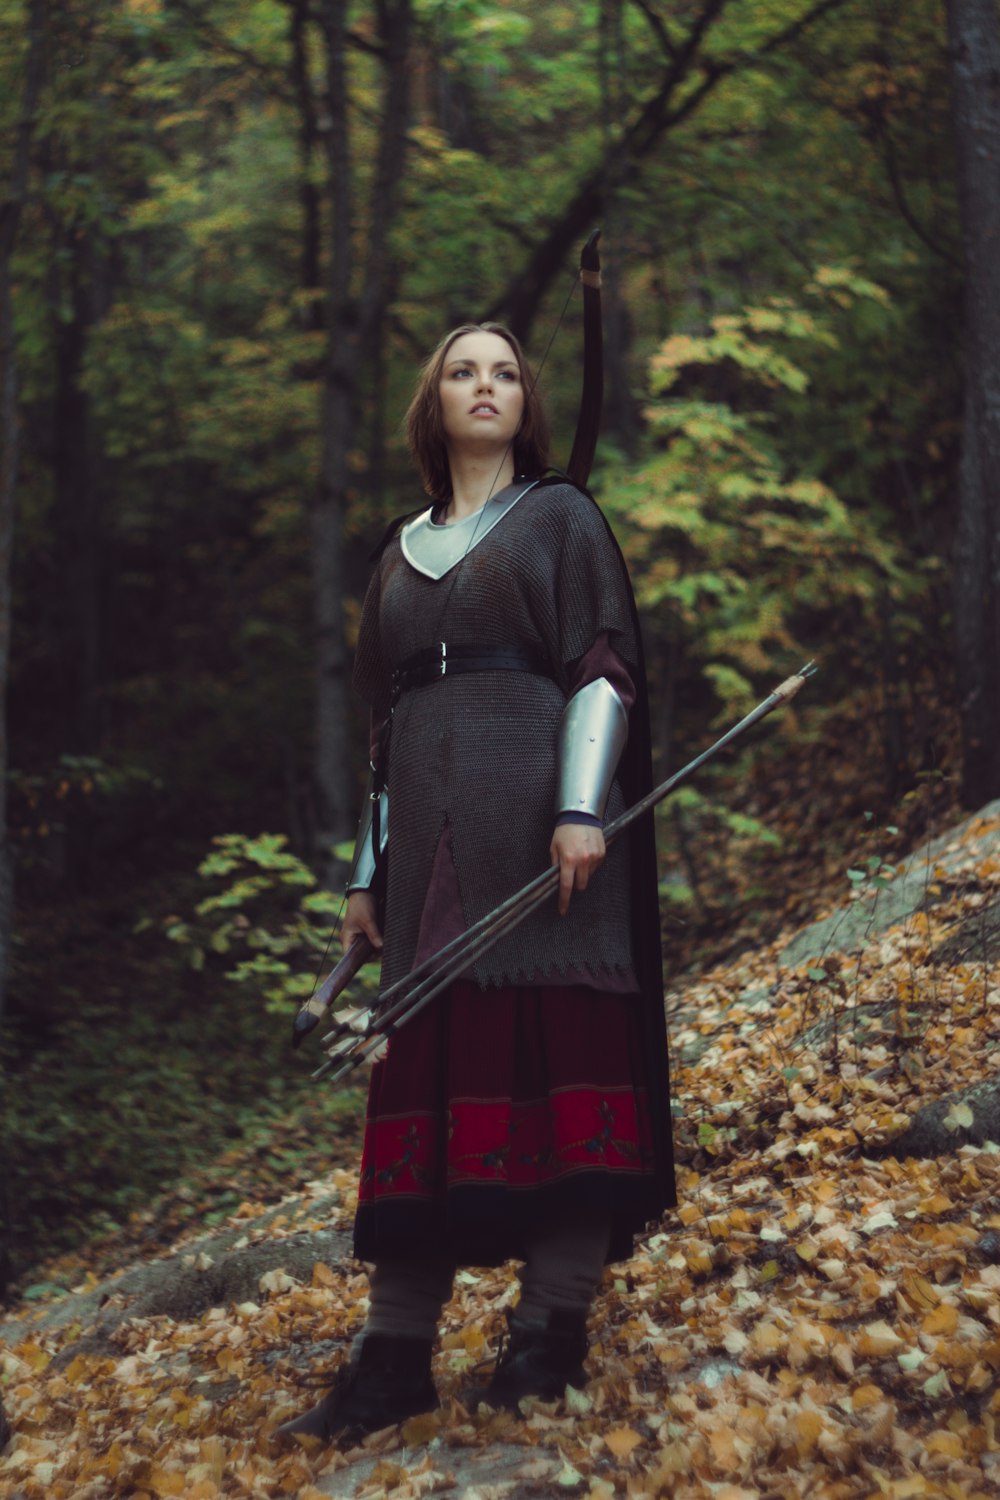 a woman dressed as a knight holding a sword